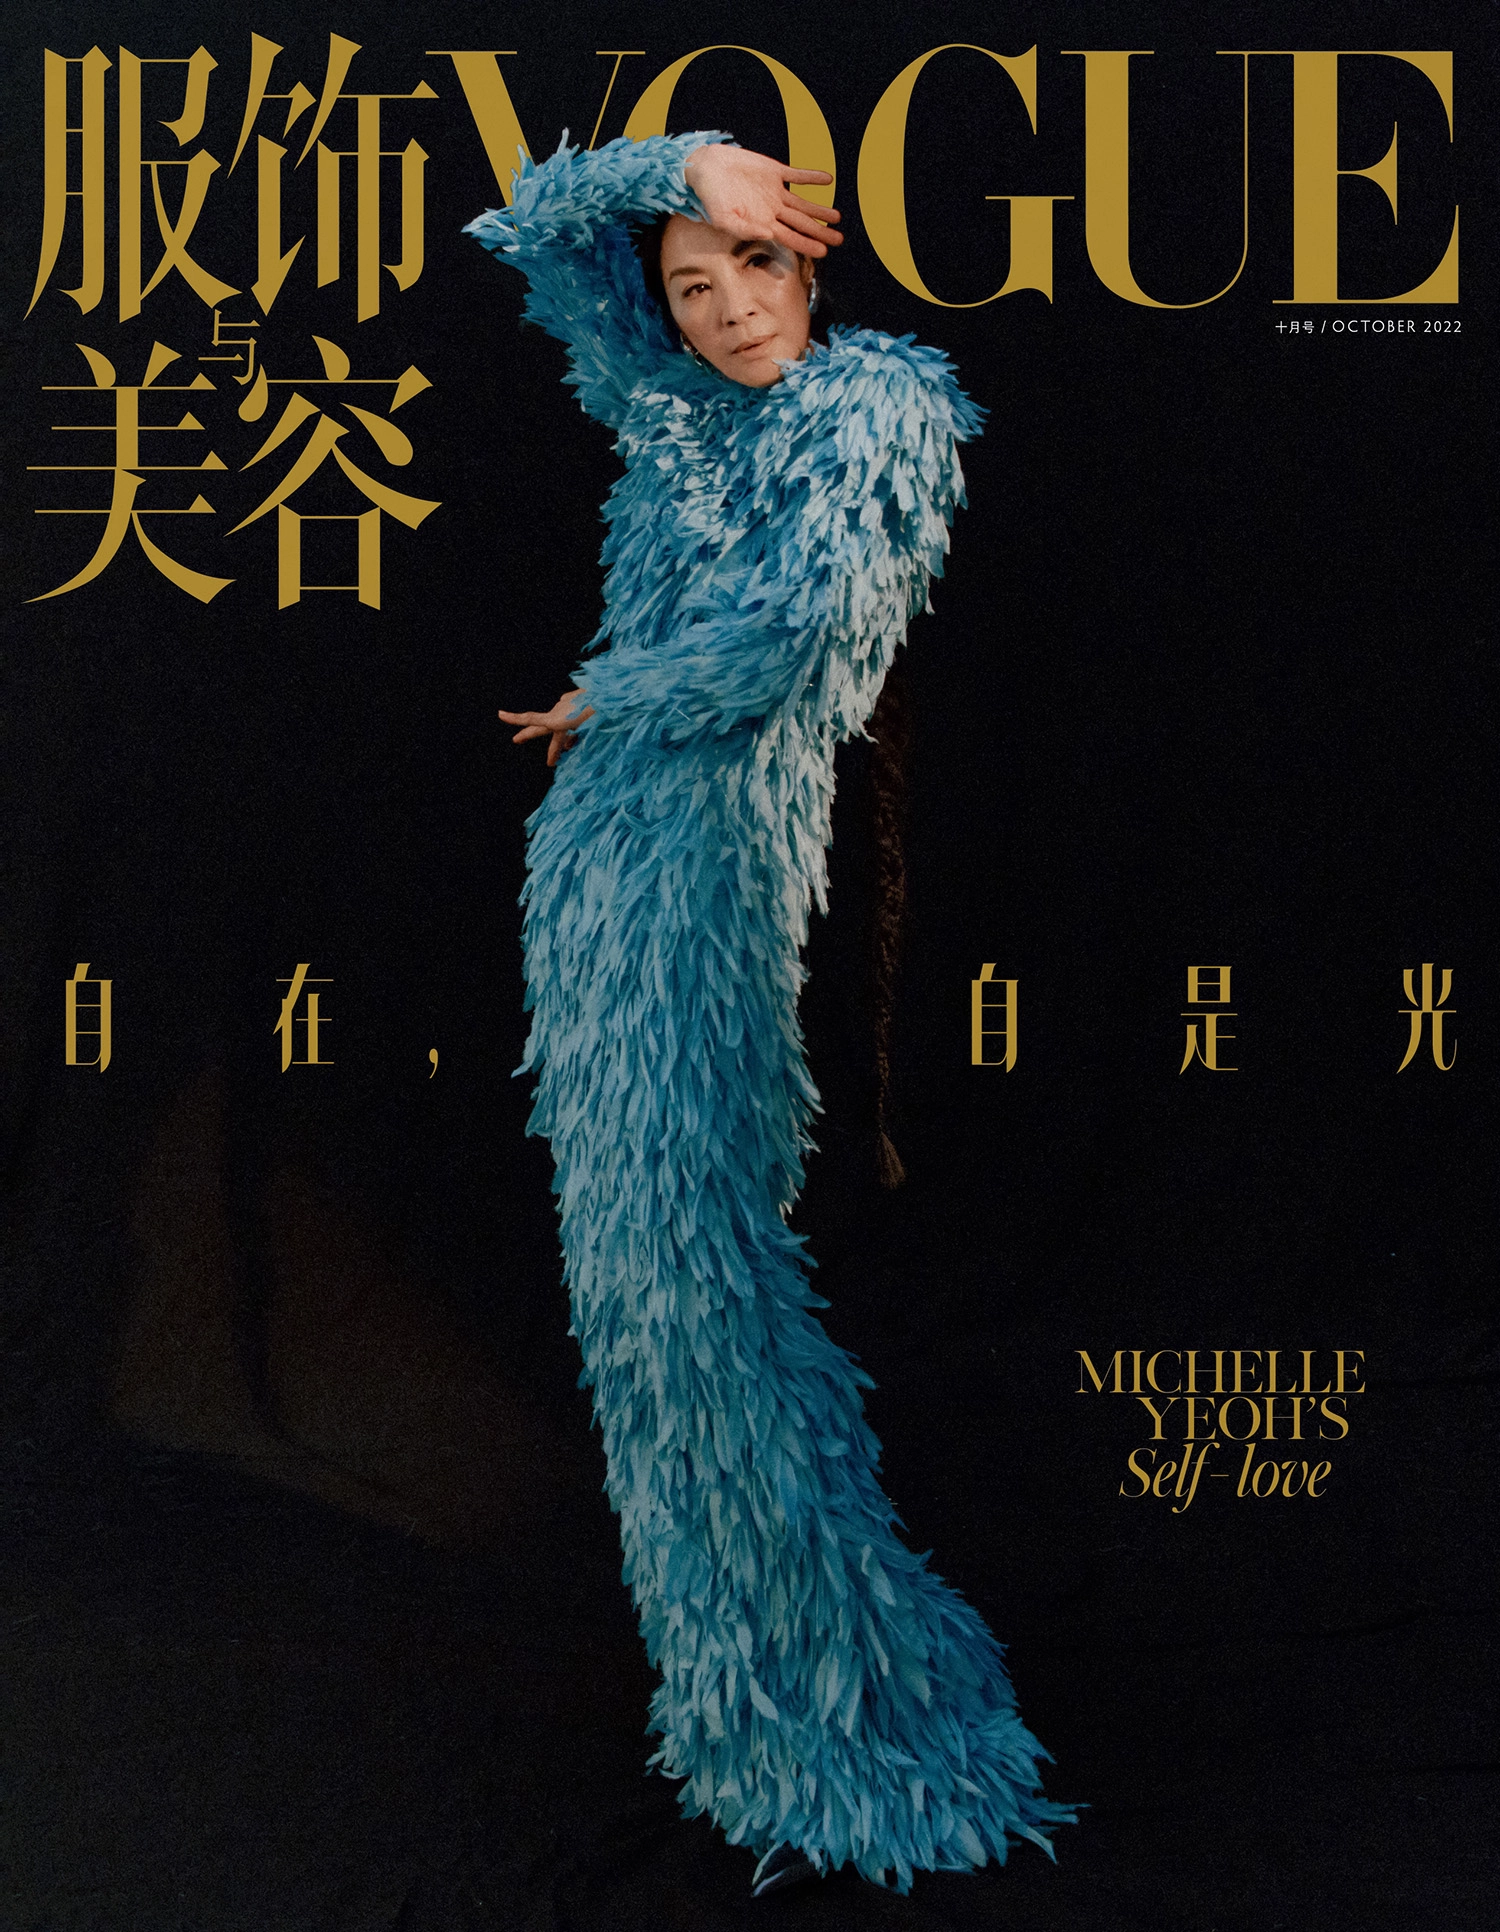 Michelle Yeoh covers Vogue China October 2022 by Agnes Lloyd-Platt